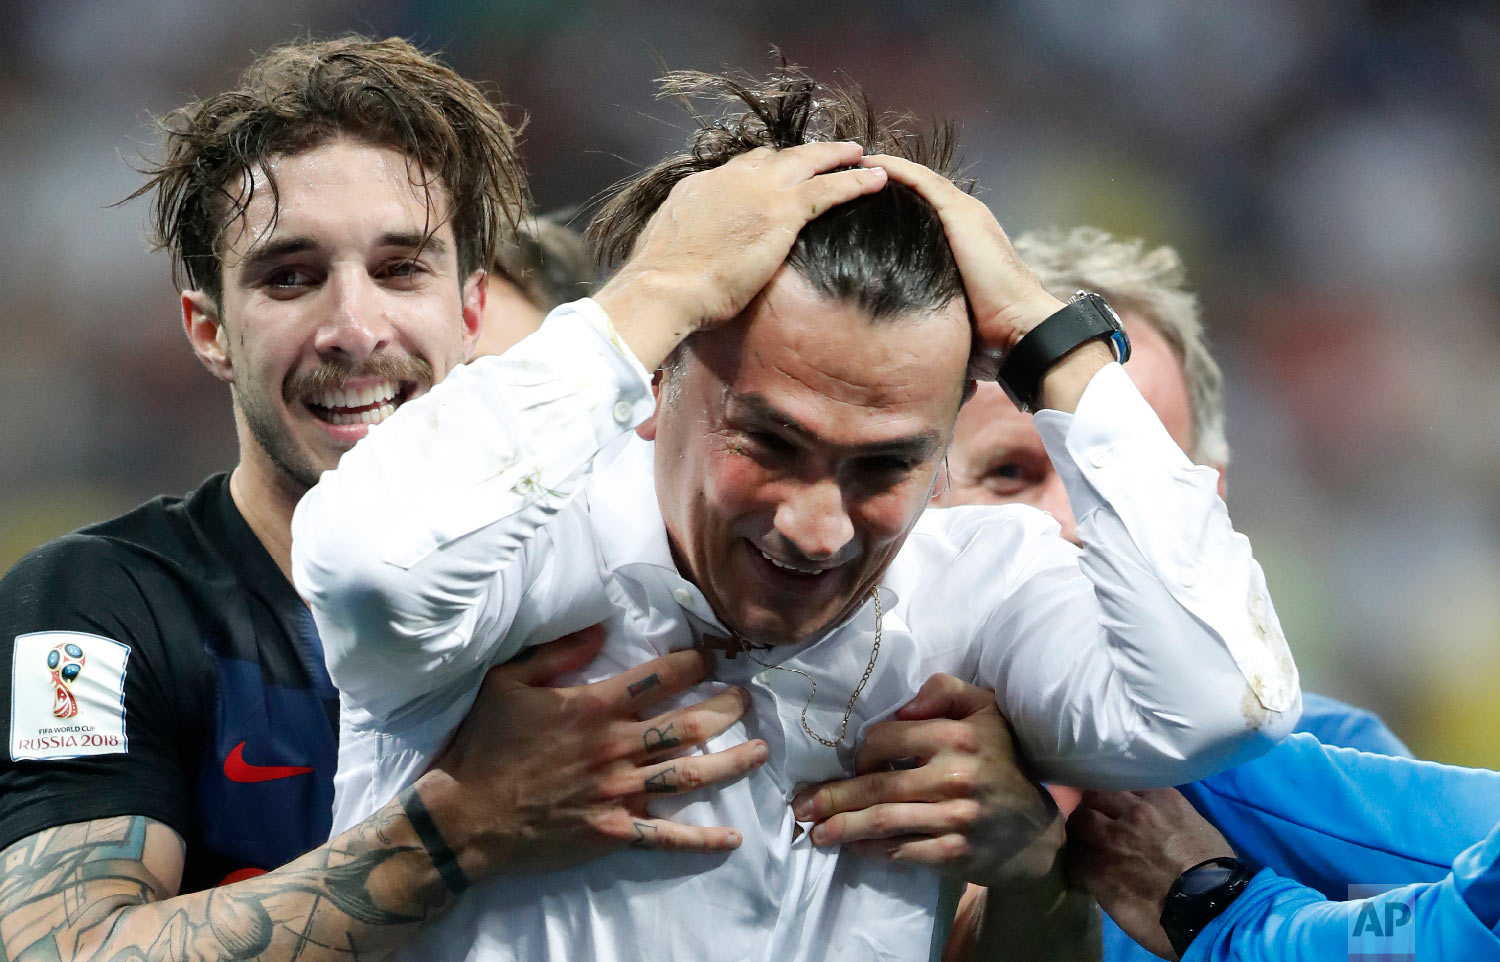  Croatia head coach Zlatko Dalic celebrates with Sime Vrsaljko, left, after his team advanced to the final during the semifinal match between Croatia and England at the 2018 soccer World Cup in the Luzhniki Stadium in Moscow, Russia, Wednesday, July 